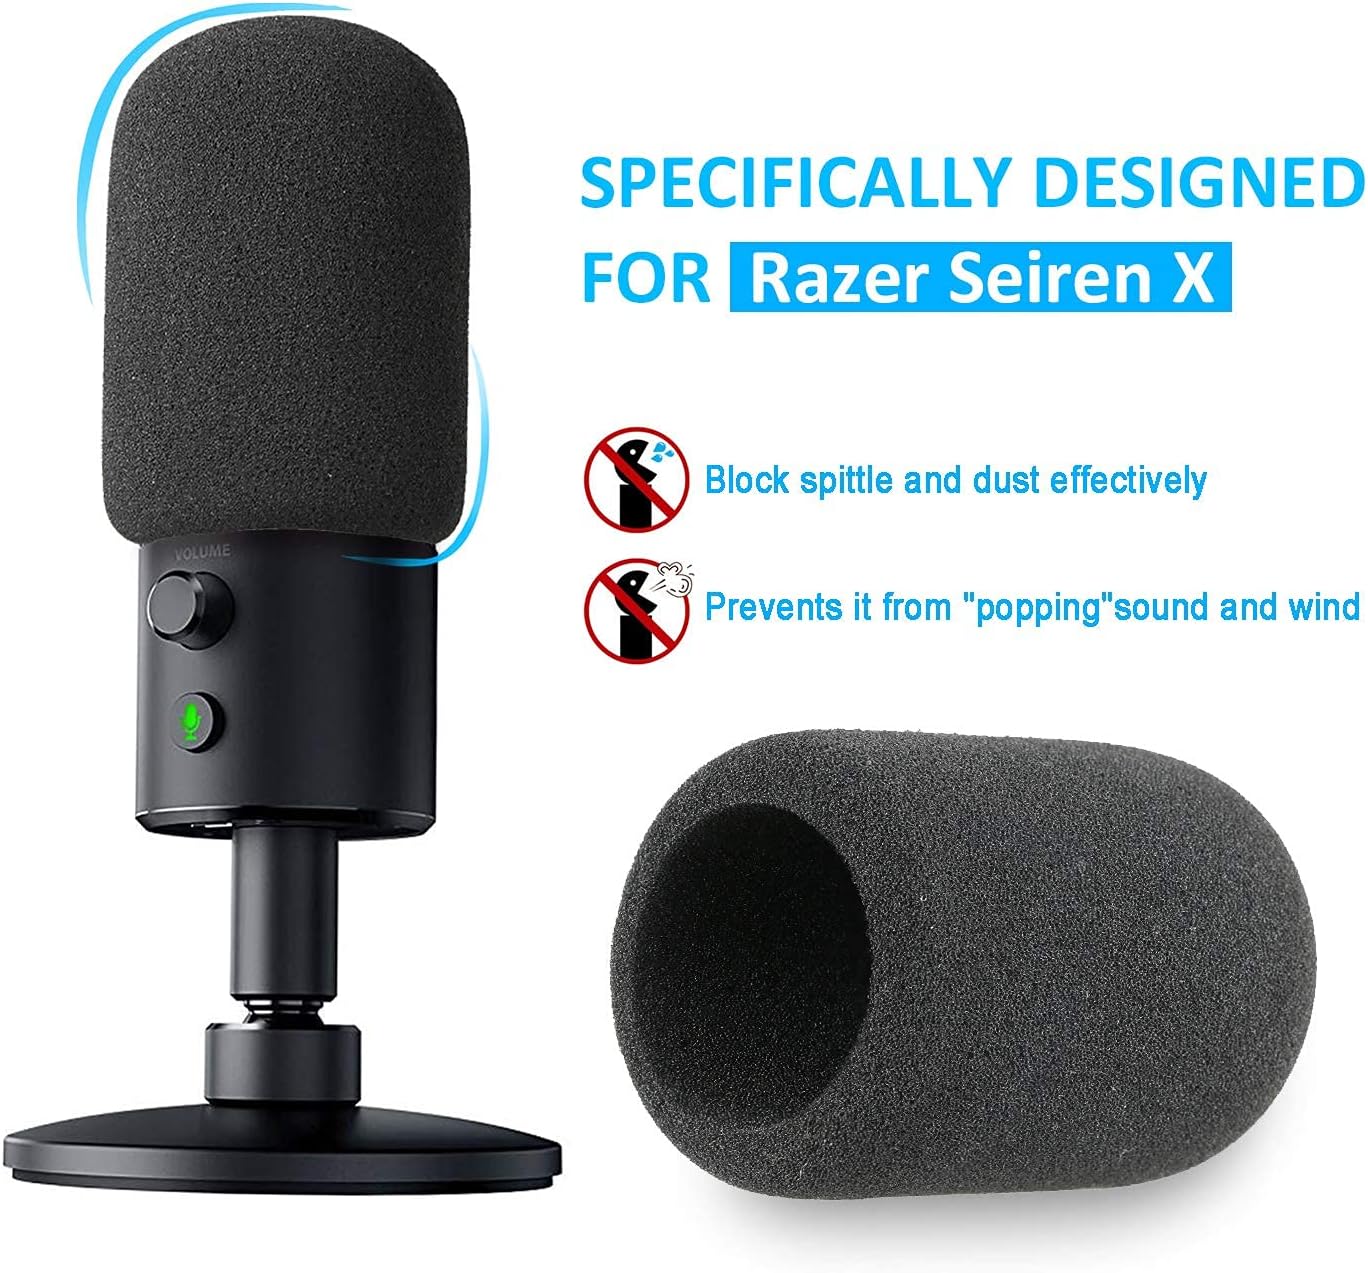 SUNMON Shock Mount with Pop Filter for Razer Seiren X Microphone Seiren X Shock Mount Reduces Vibration Noise Matching Boom Arm Mic Stand